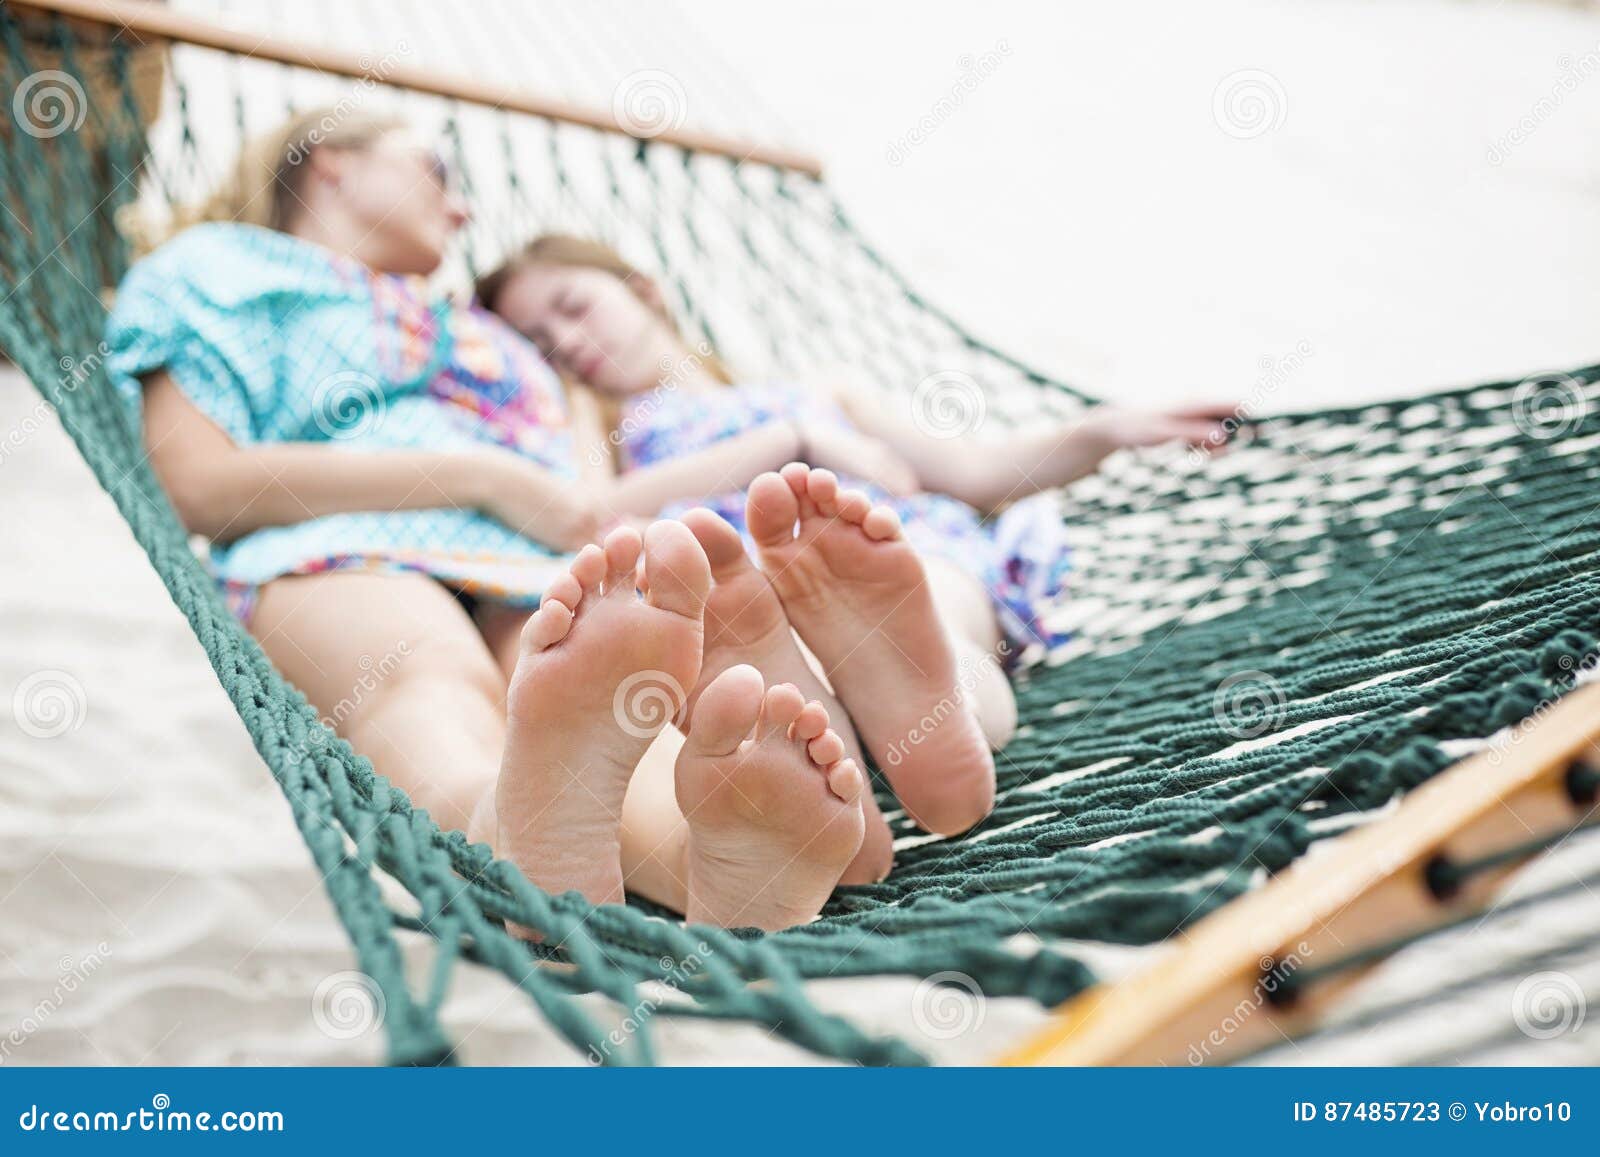 barefoot and relaxed family napping in a hammock together